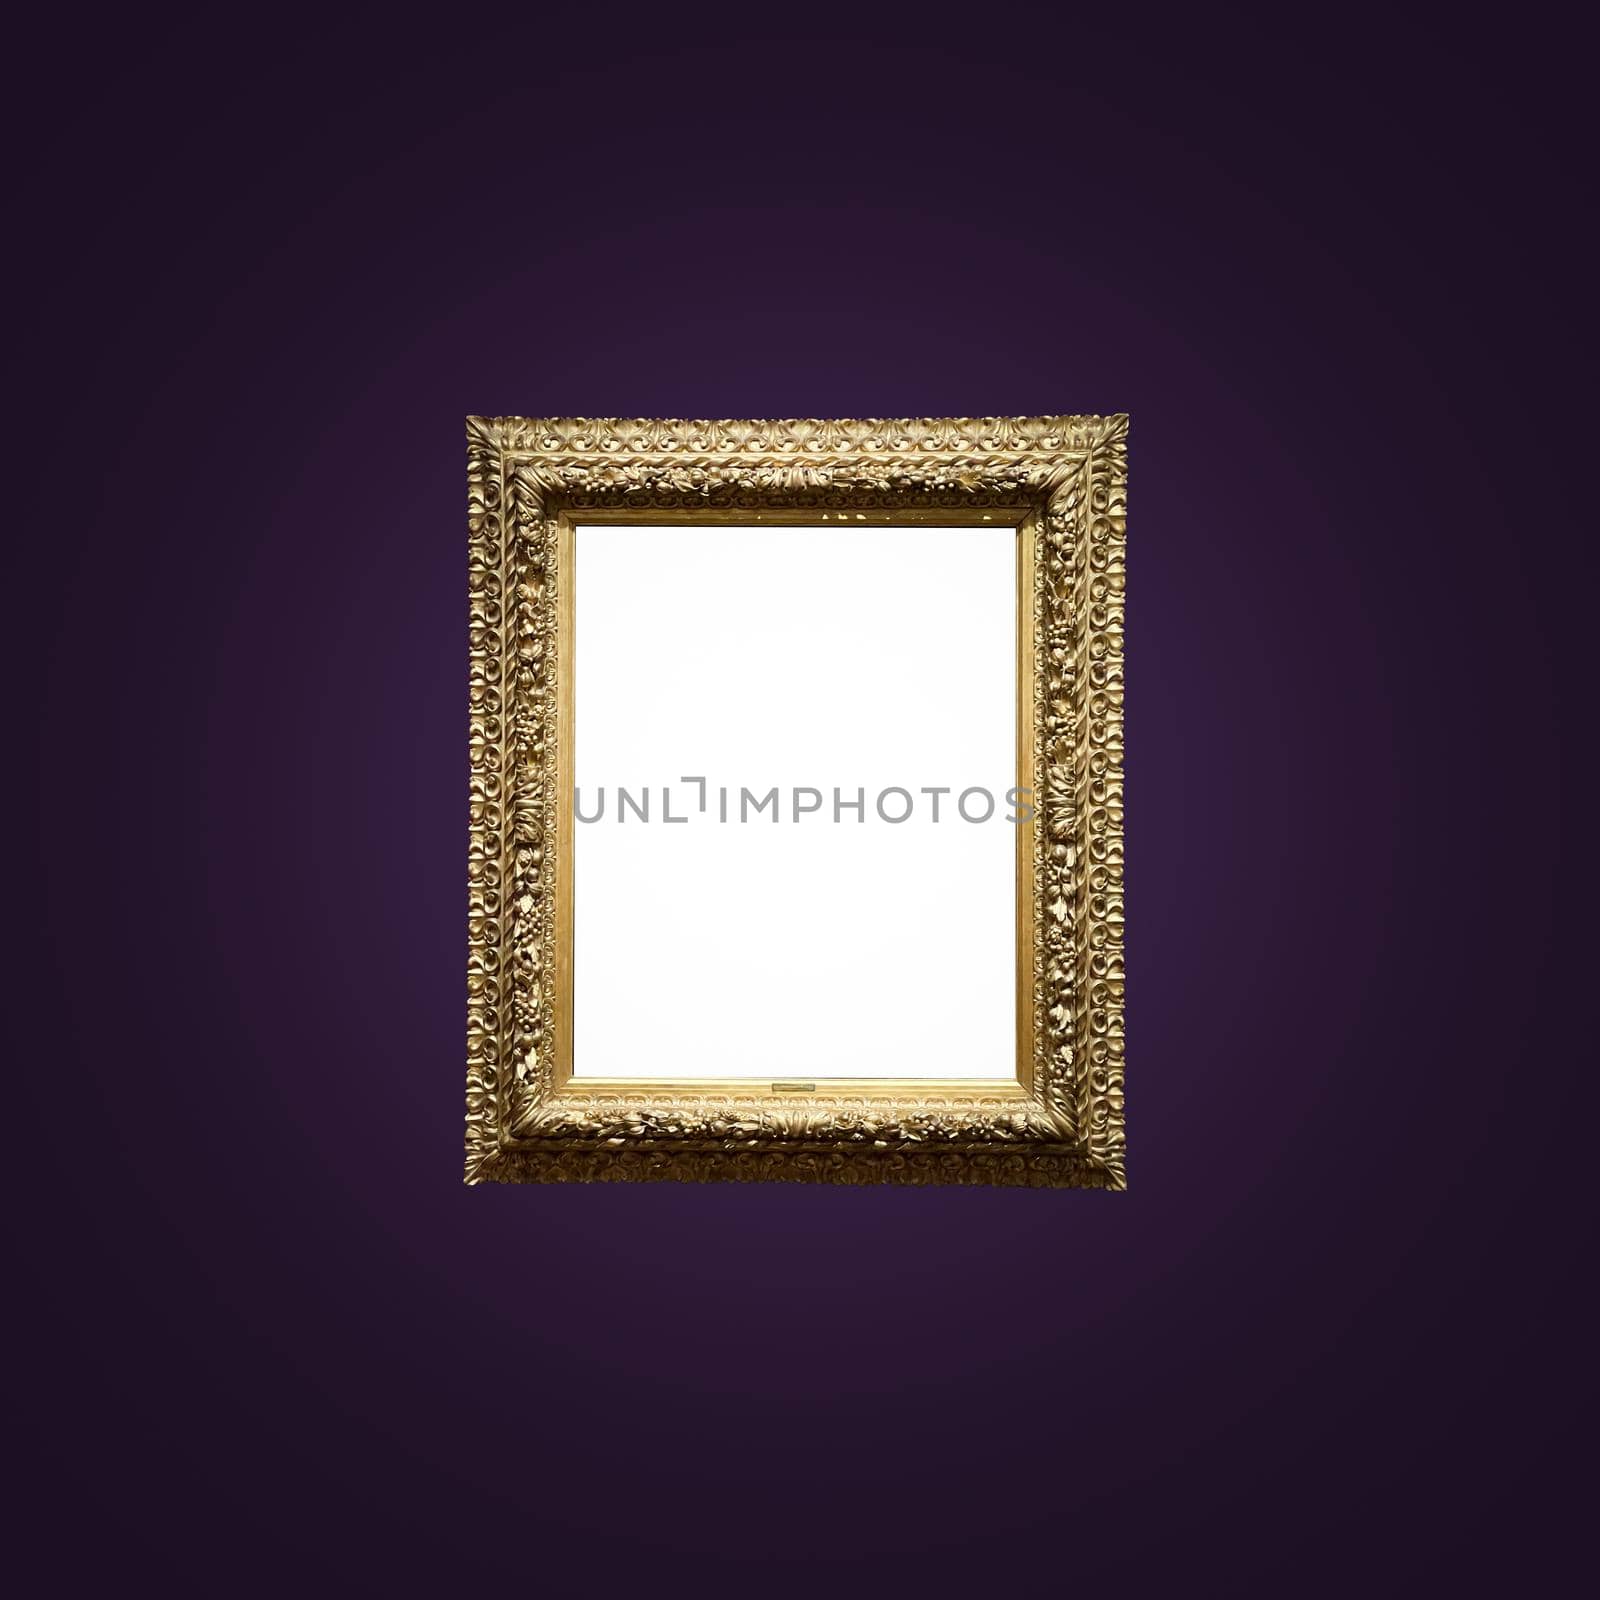 Antique art fair gallery frame on royal purple wall at auction house or museum exhibition, blank template with empty white copyspace for mockup design, artwork concept